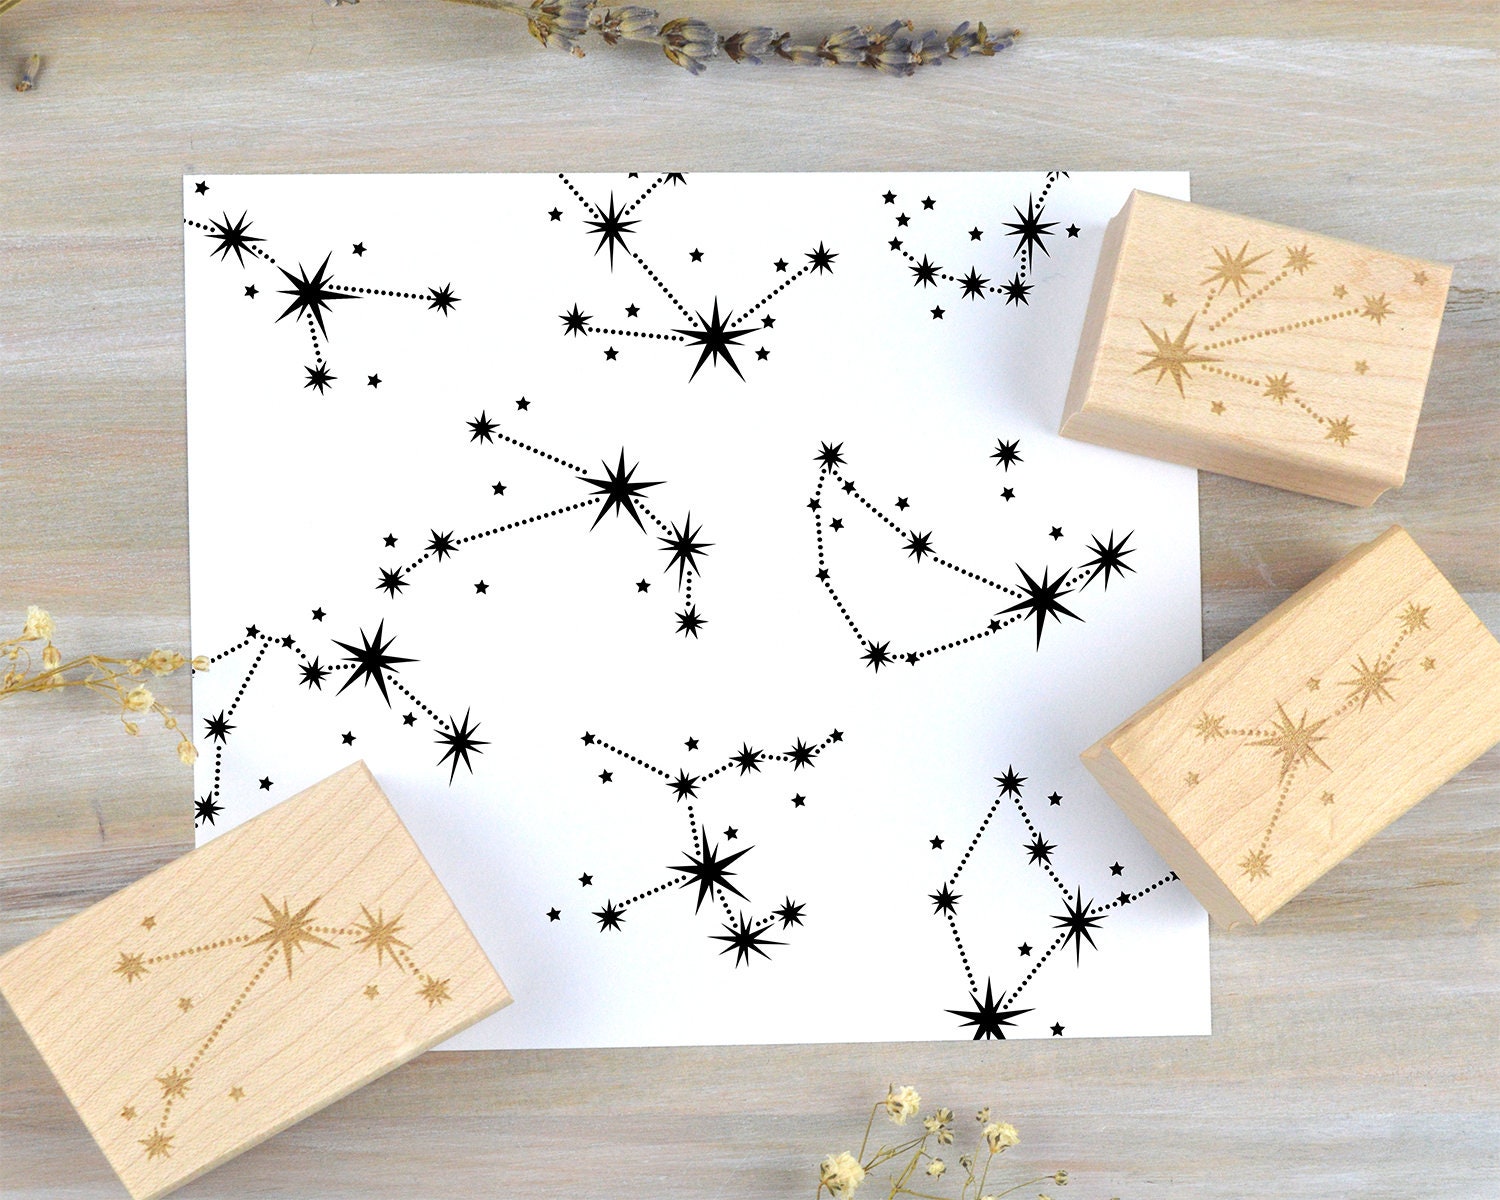 North Star Stamp, Christmas Star Stamp, Star Stamp for Gift Tags, Xmas  Decor Idea, Santa Claus Gifts, Holly Stamp, DIY Christmas Tags 